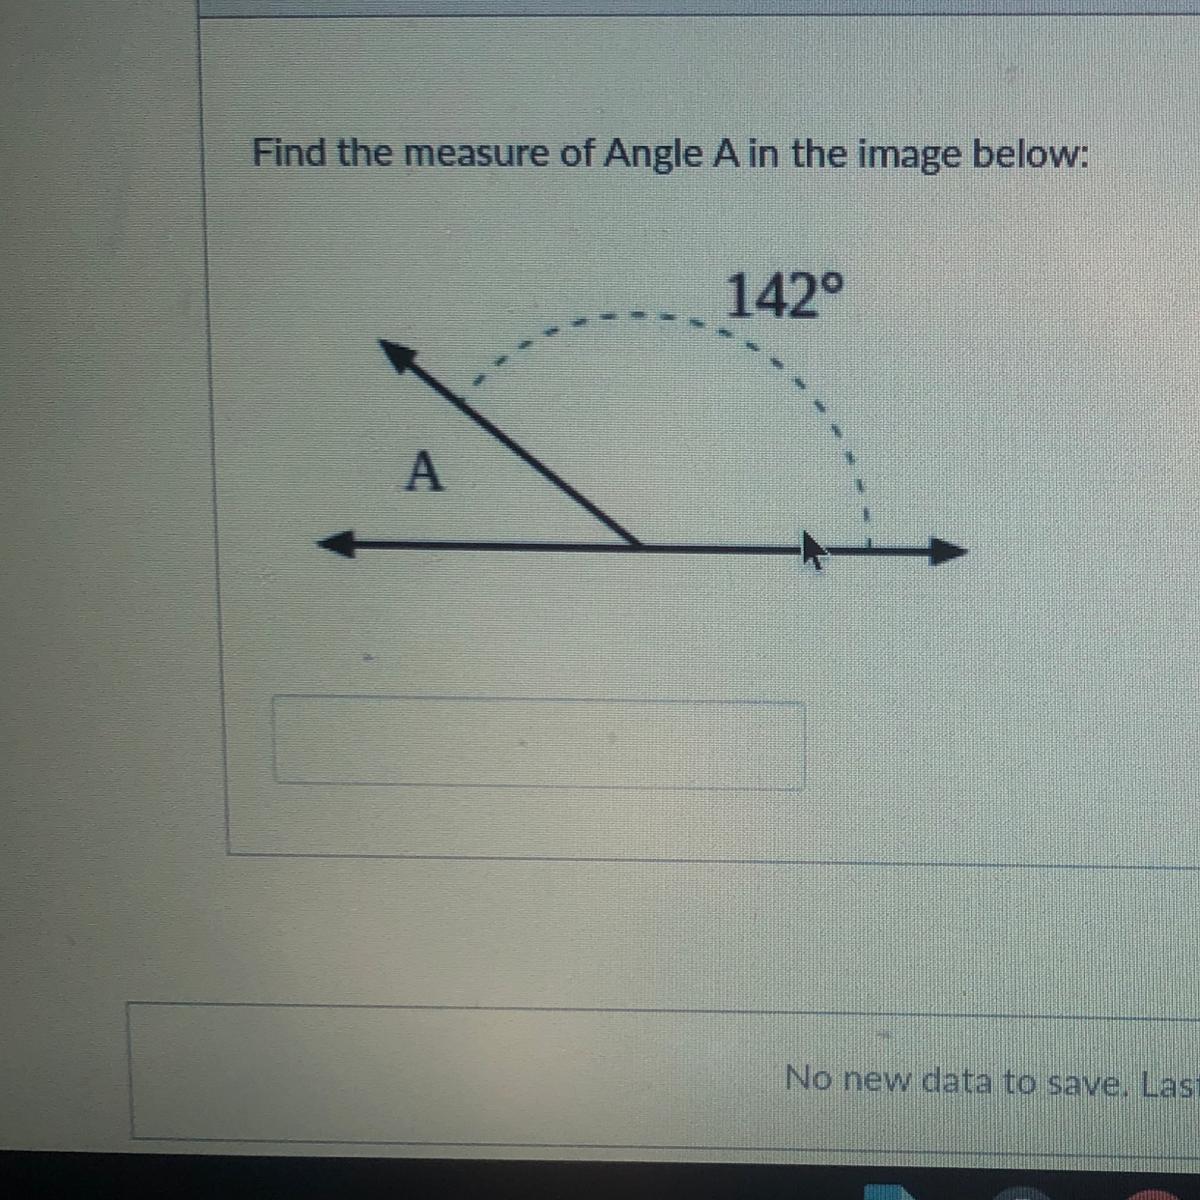 Find The Measure Of Angle A In The Image Below:142